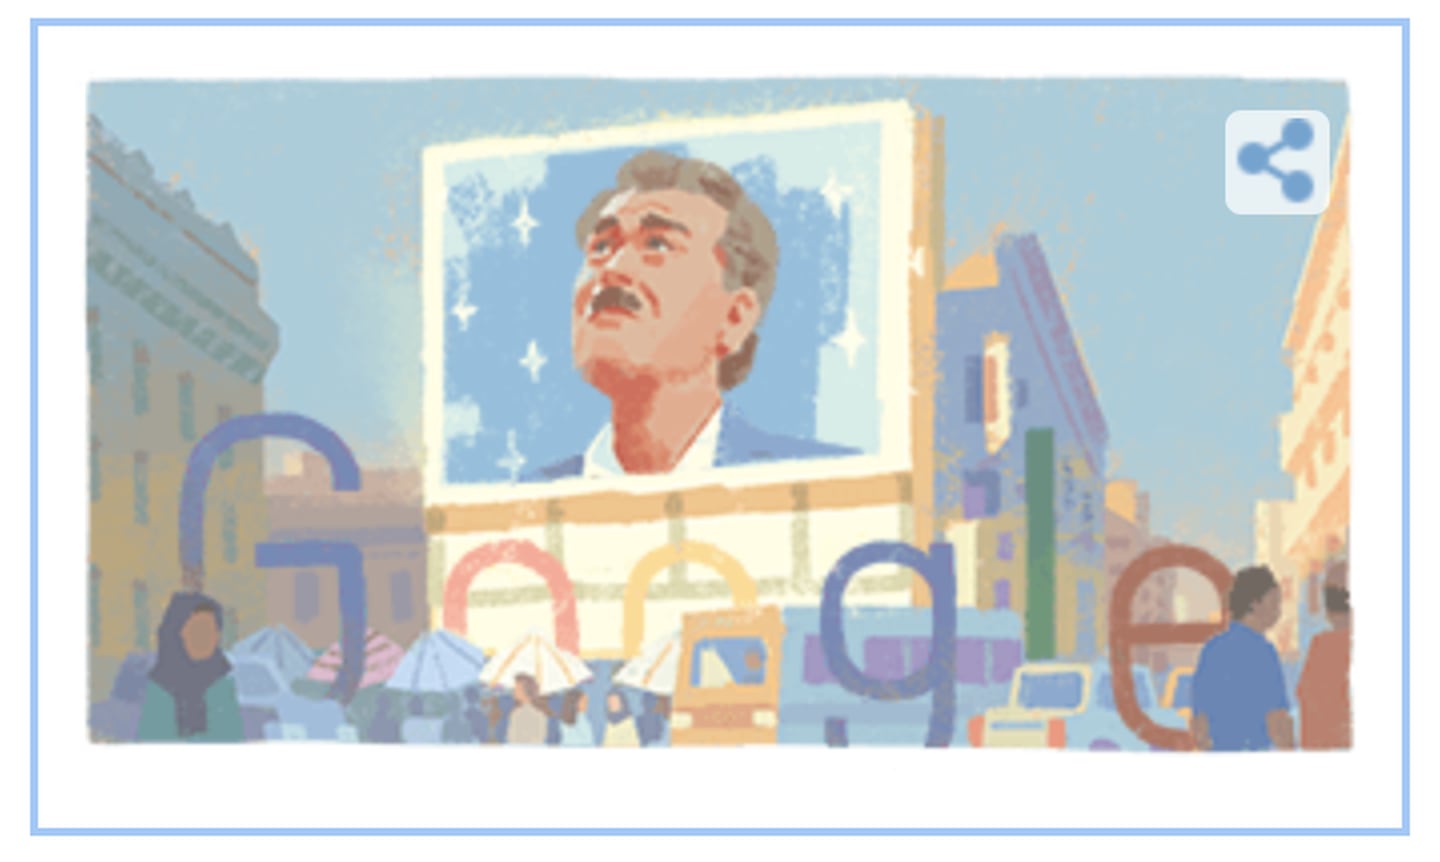 The June 4 Google Doodle celebrates actor Mahmoud Abdel Aziz on what would have been his 76th birthday. Photo: Google